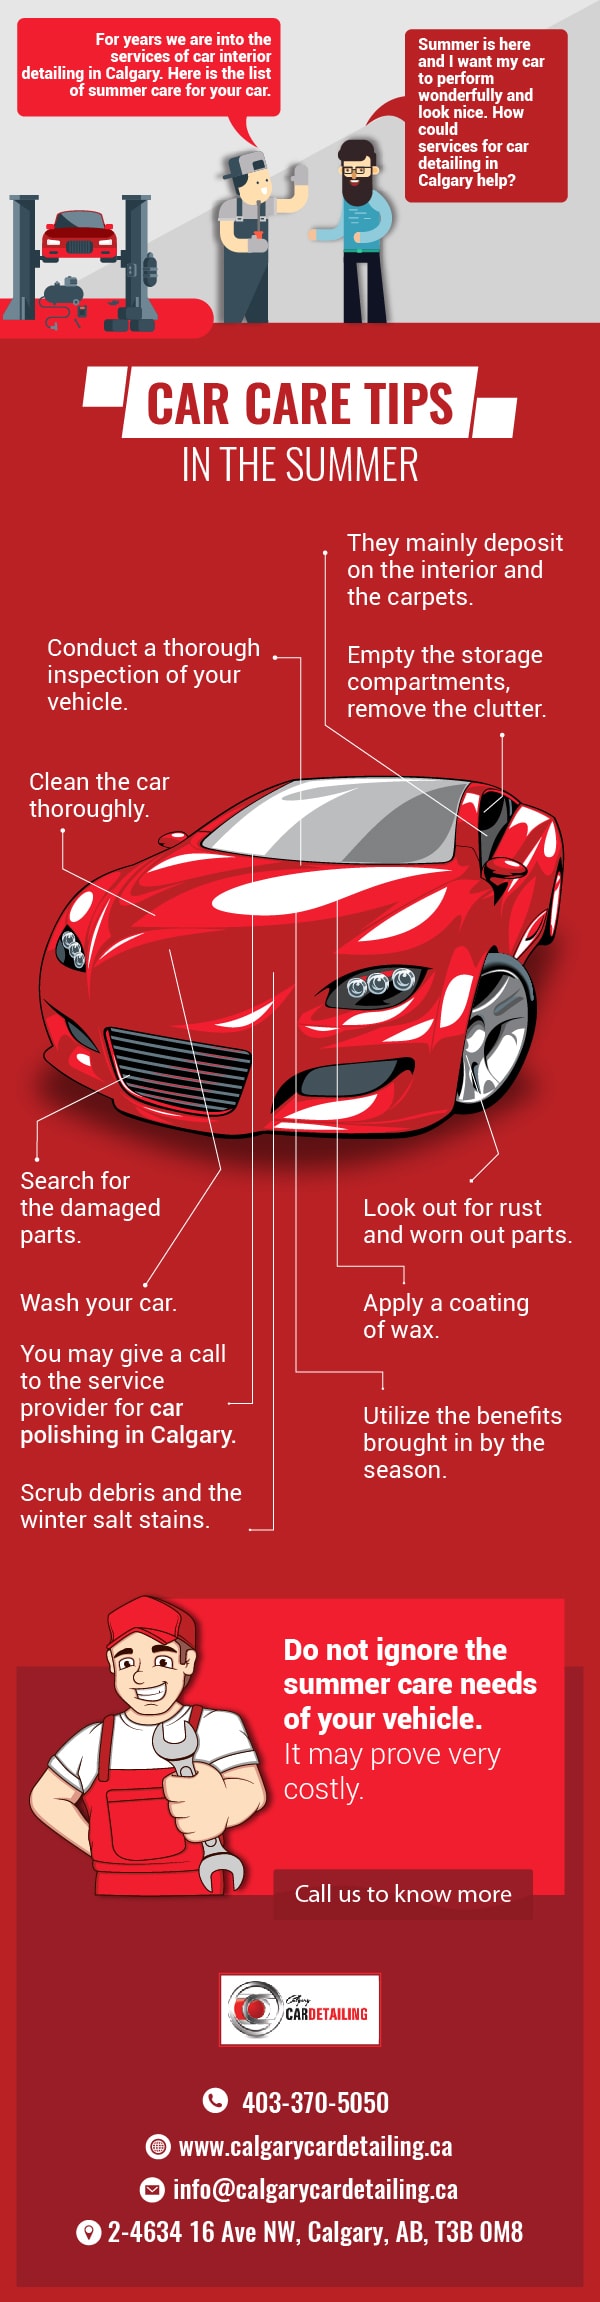 Car Care Tips in the Summer